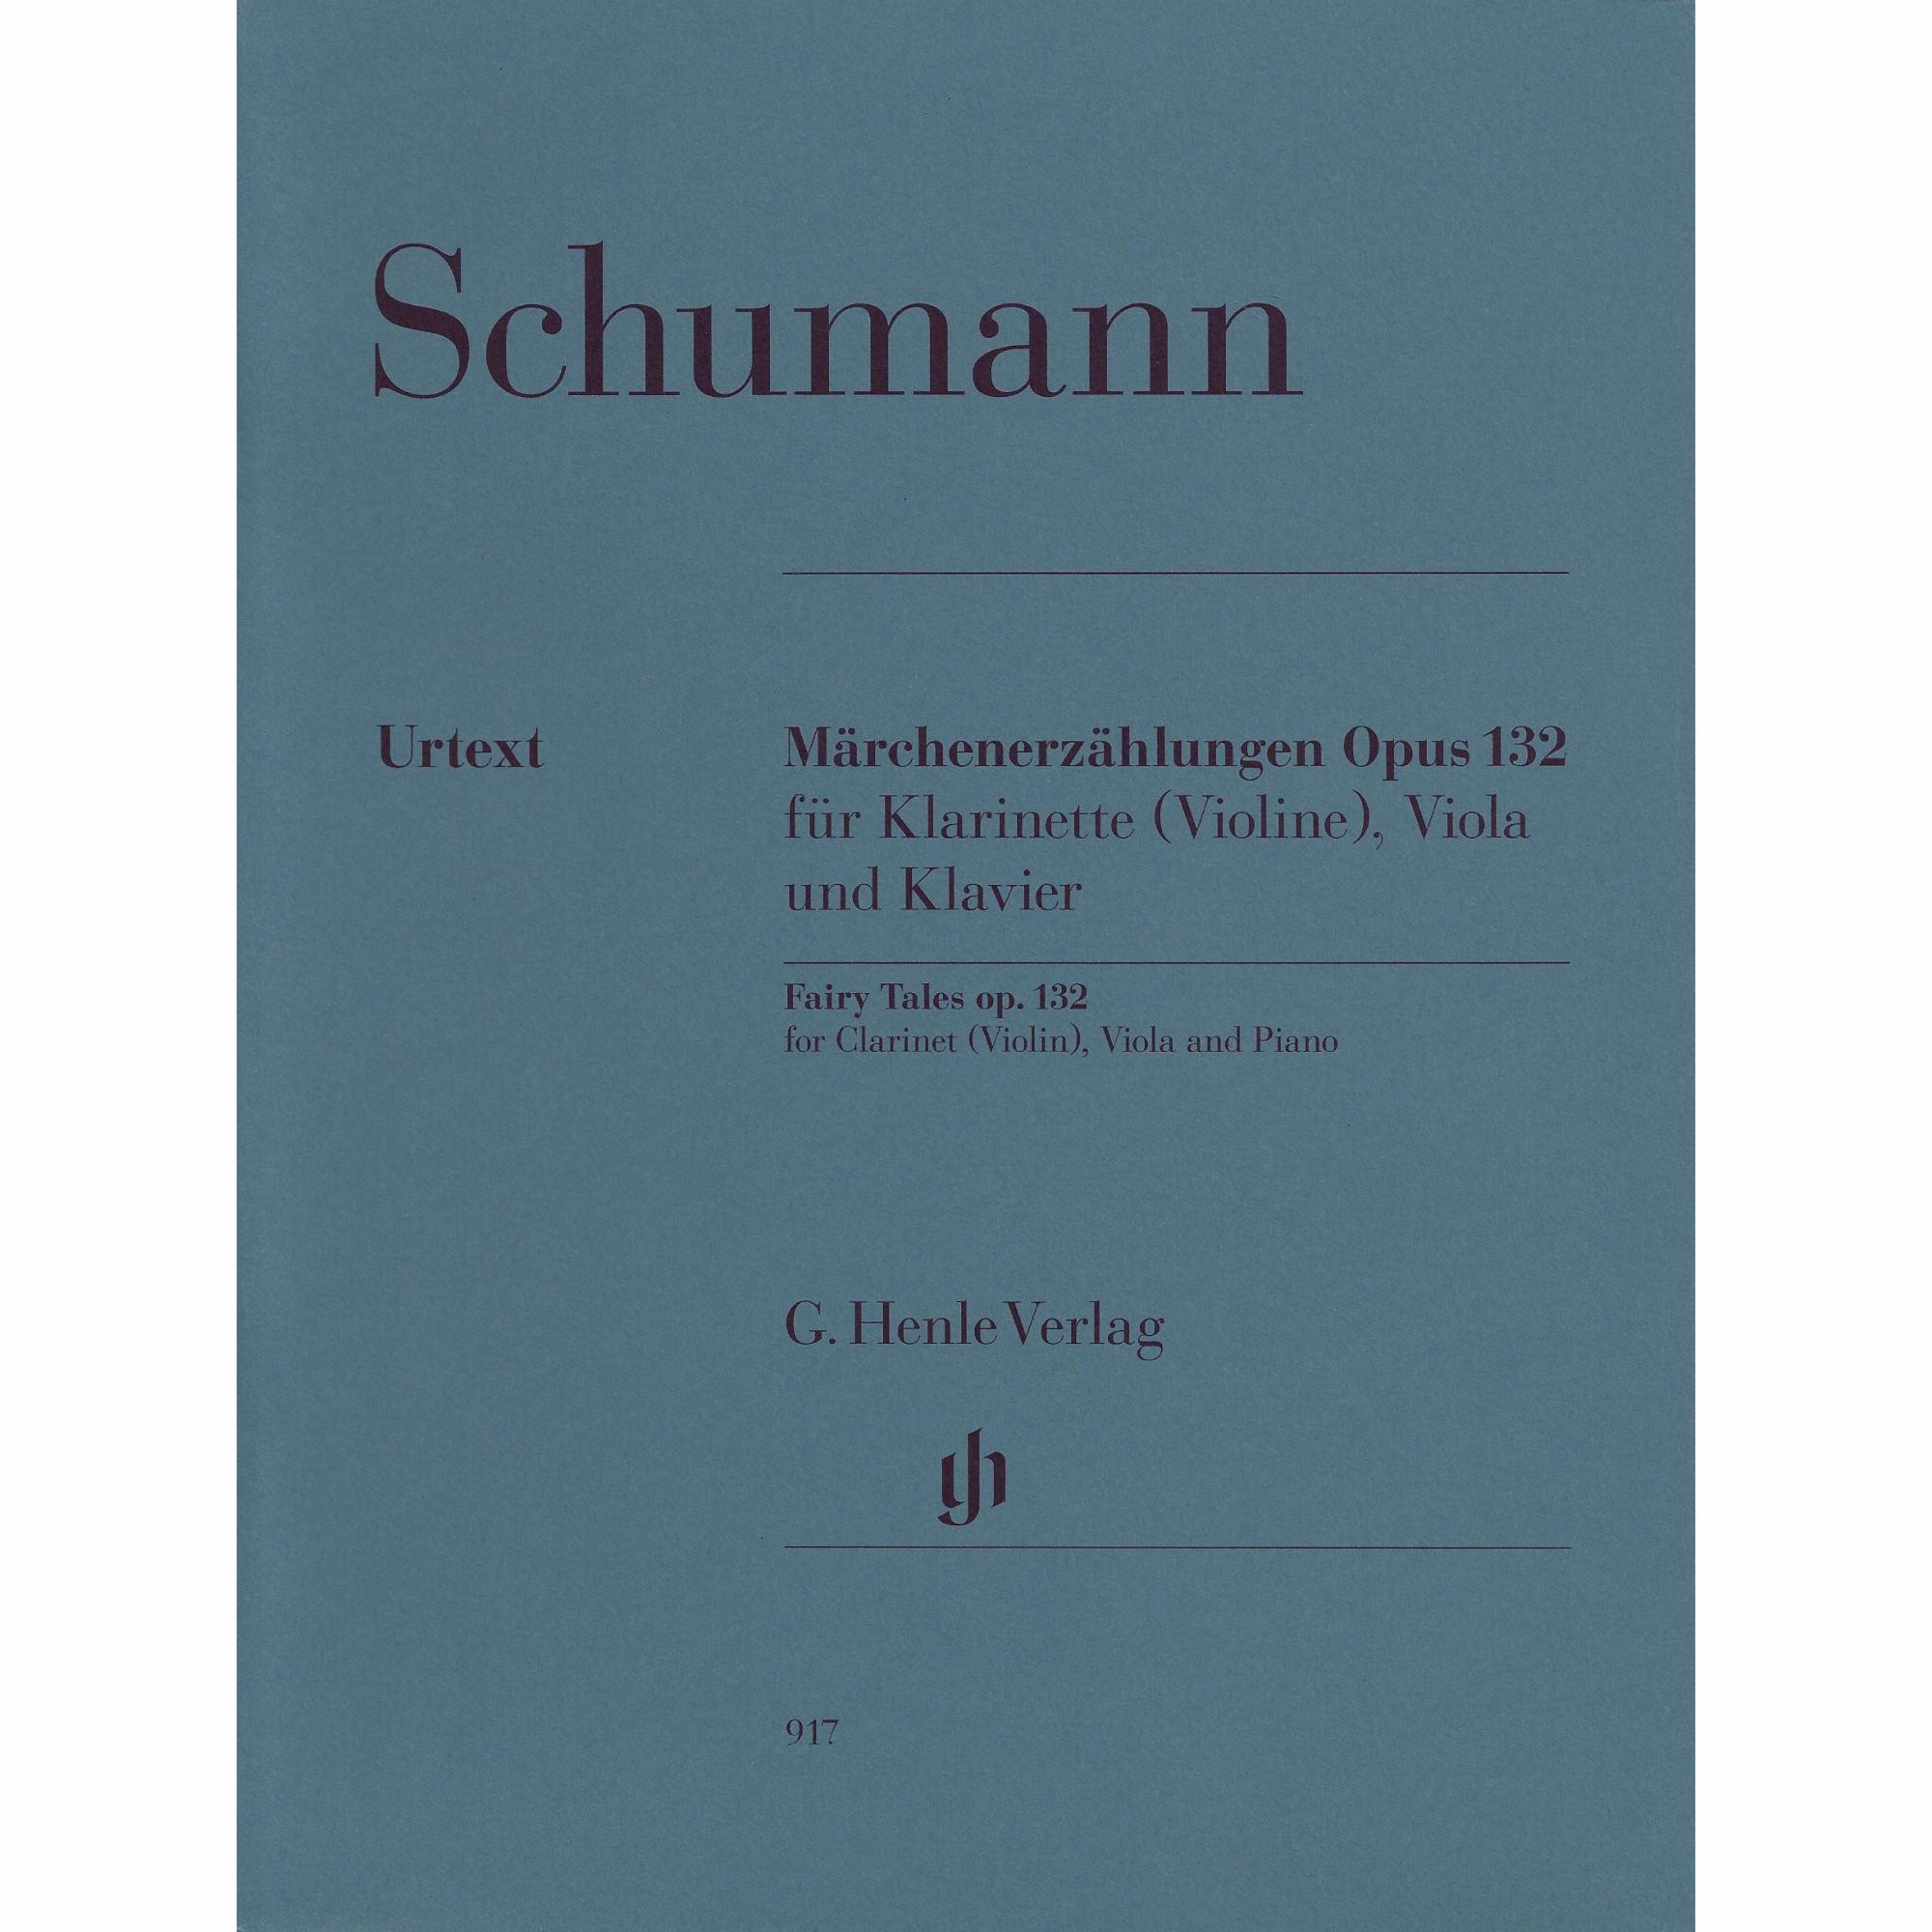 Schumann -- Fairy Tales, Op. 132 for Clarinet, Viola, and Piano